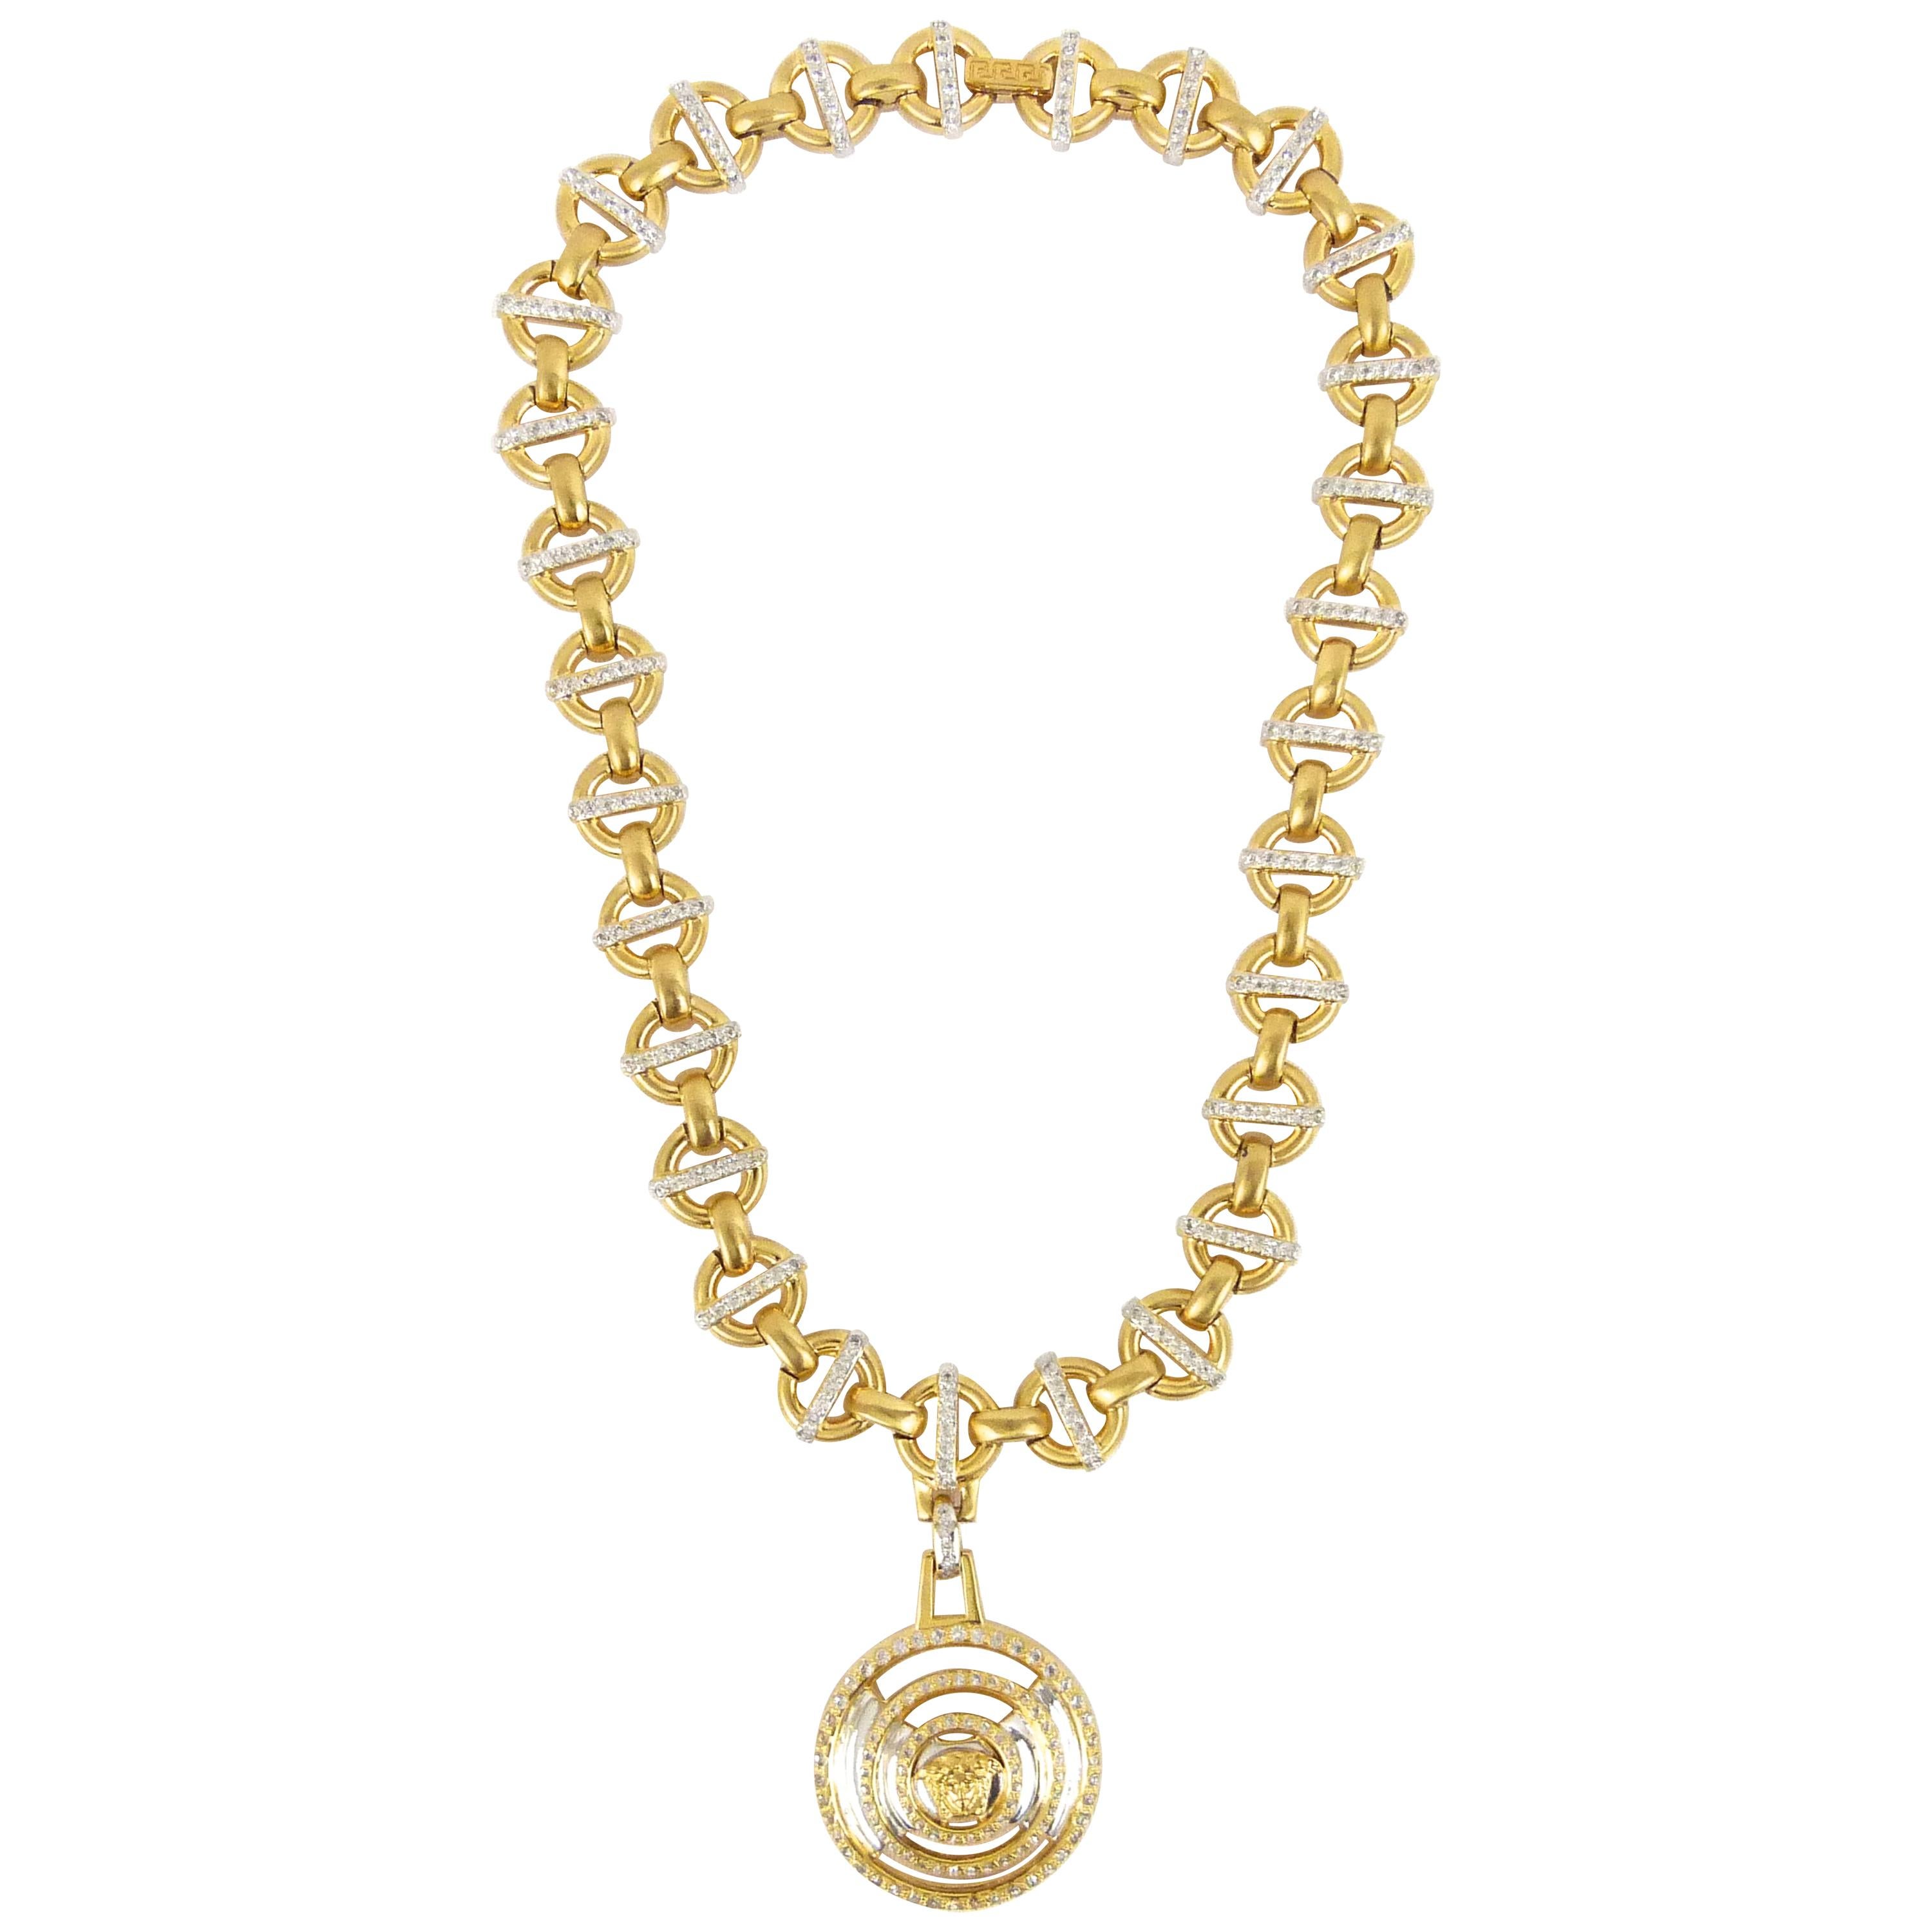 Gianni Versace 1990s gold circular necklace with medusa head pendant 